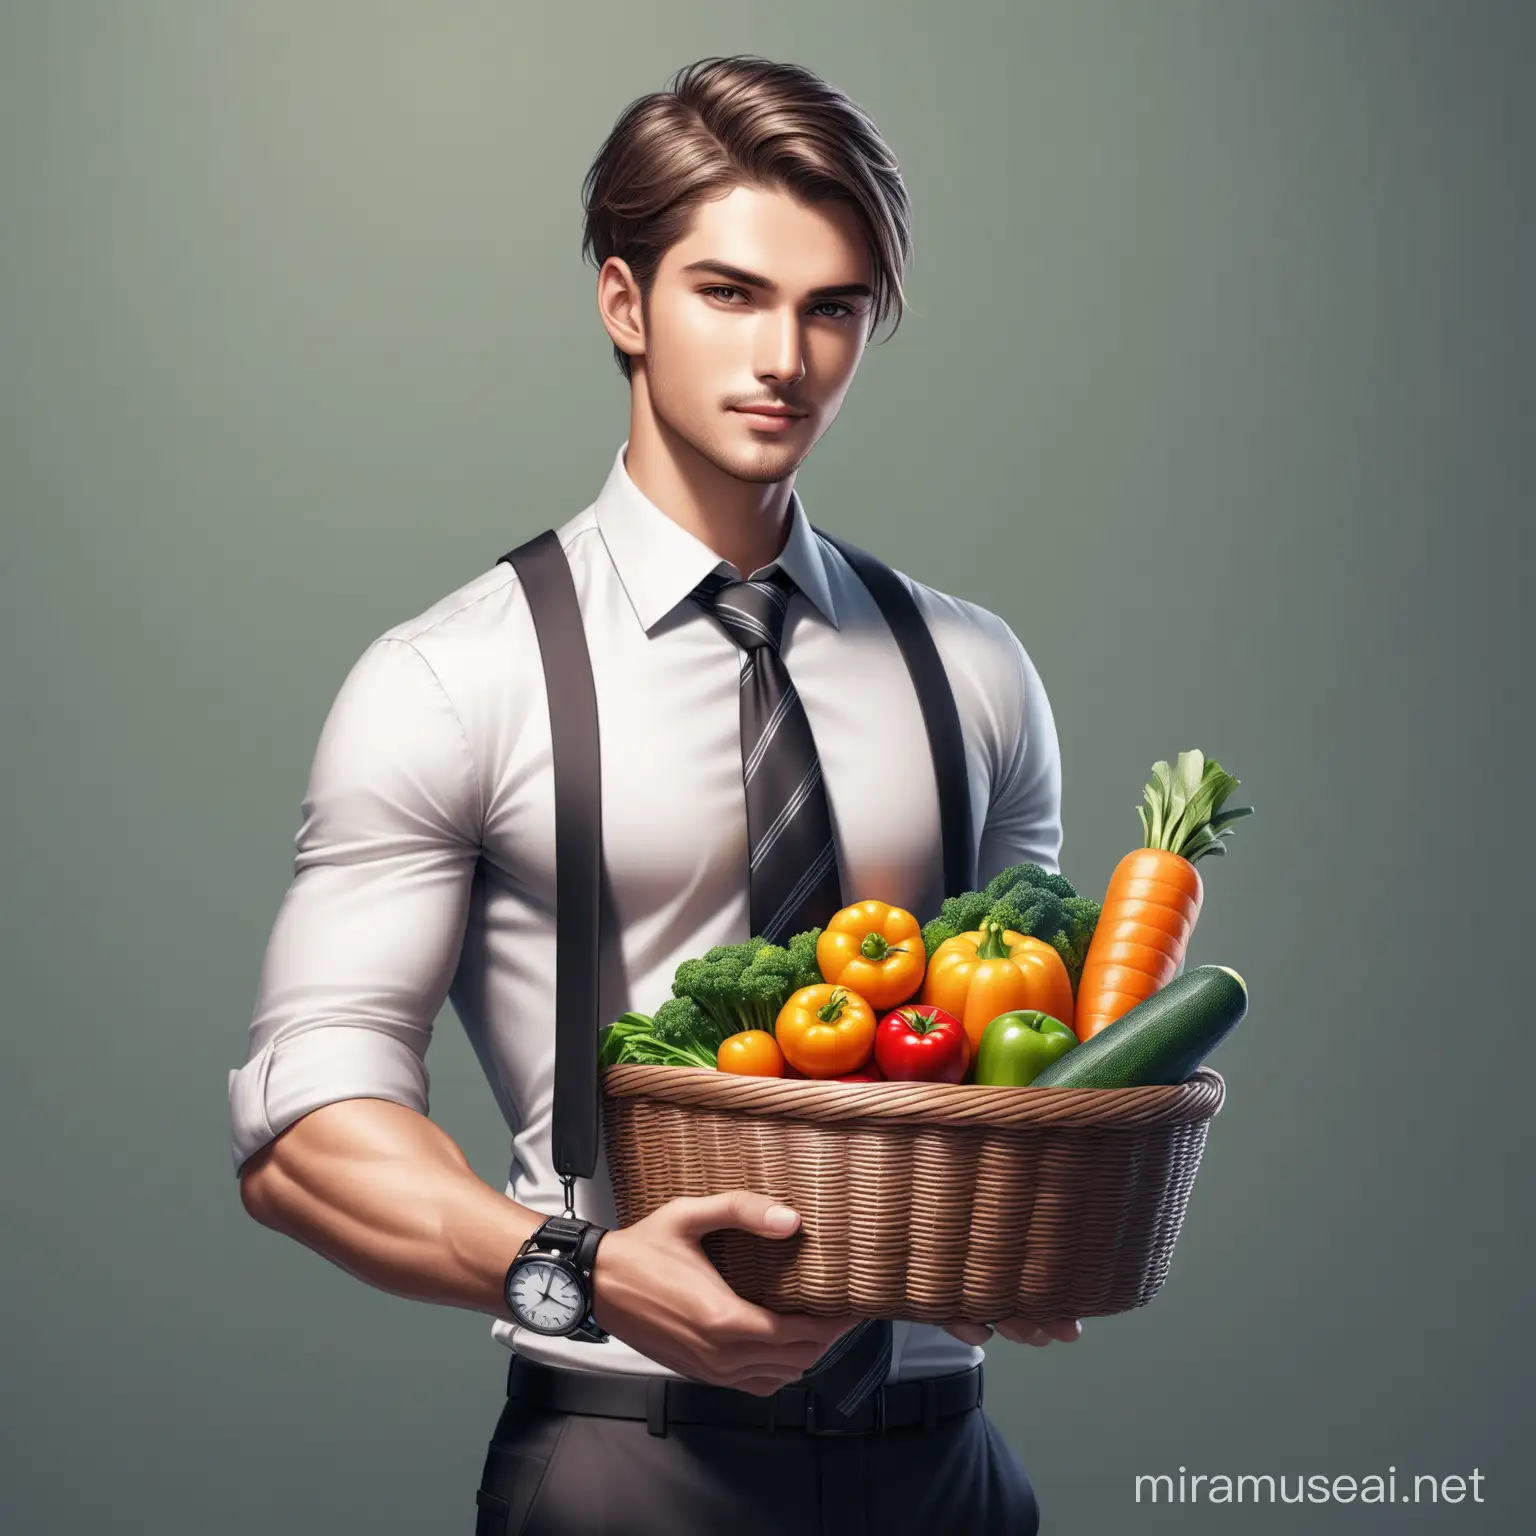 Handsome Young Man Carrying Basket of Fresh Produce with Rolled Up Sleeves and Stylish Accessories